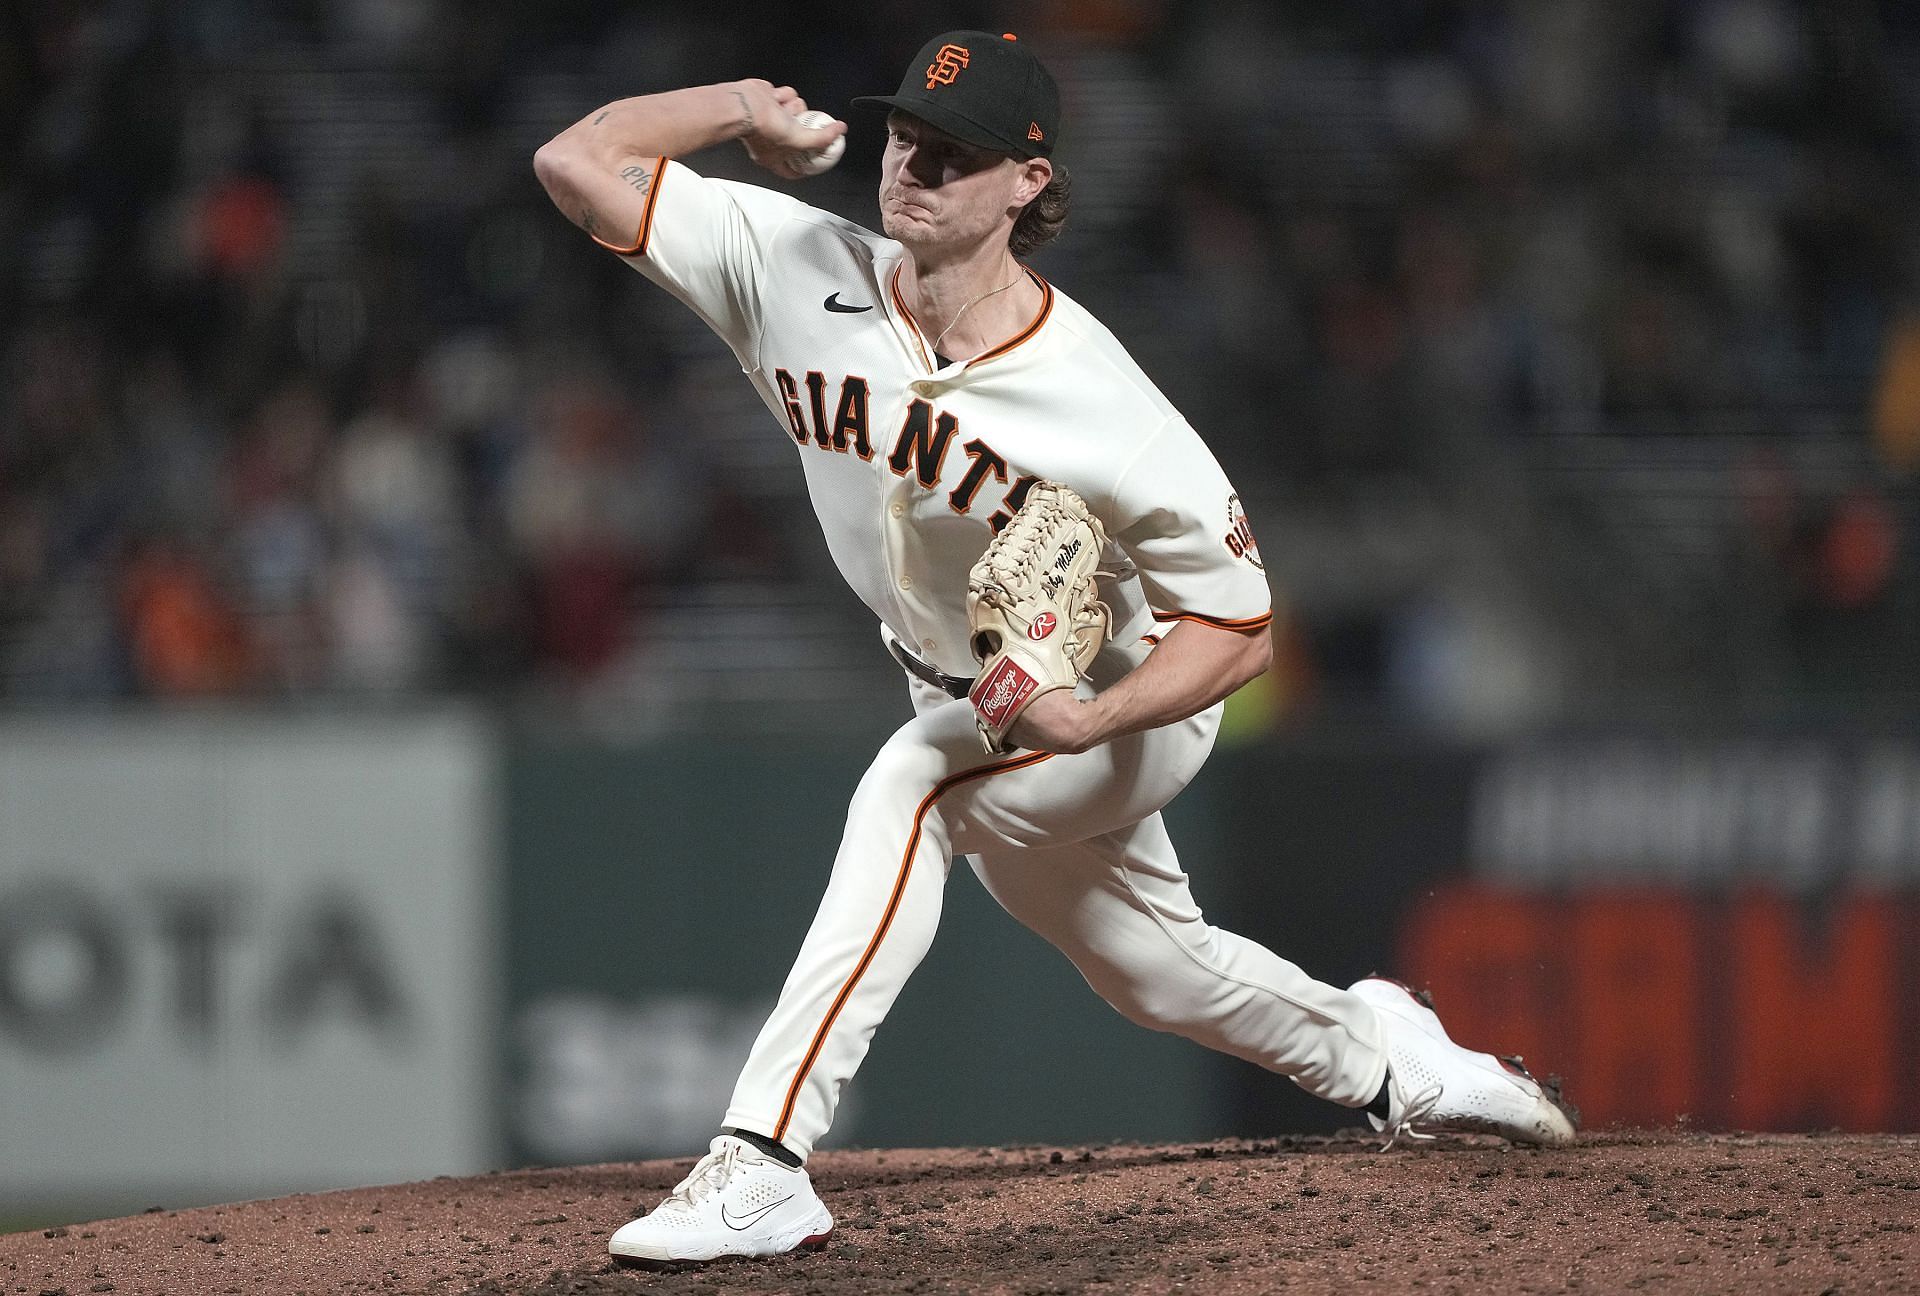 Shelby Miller playing for the San Francisco Giants